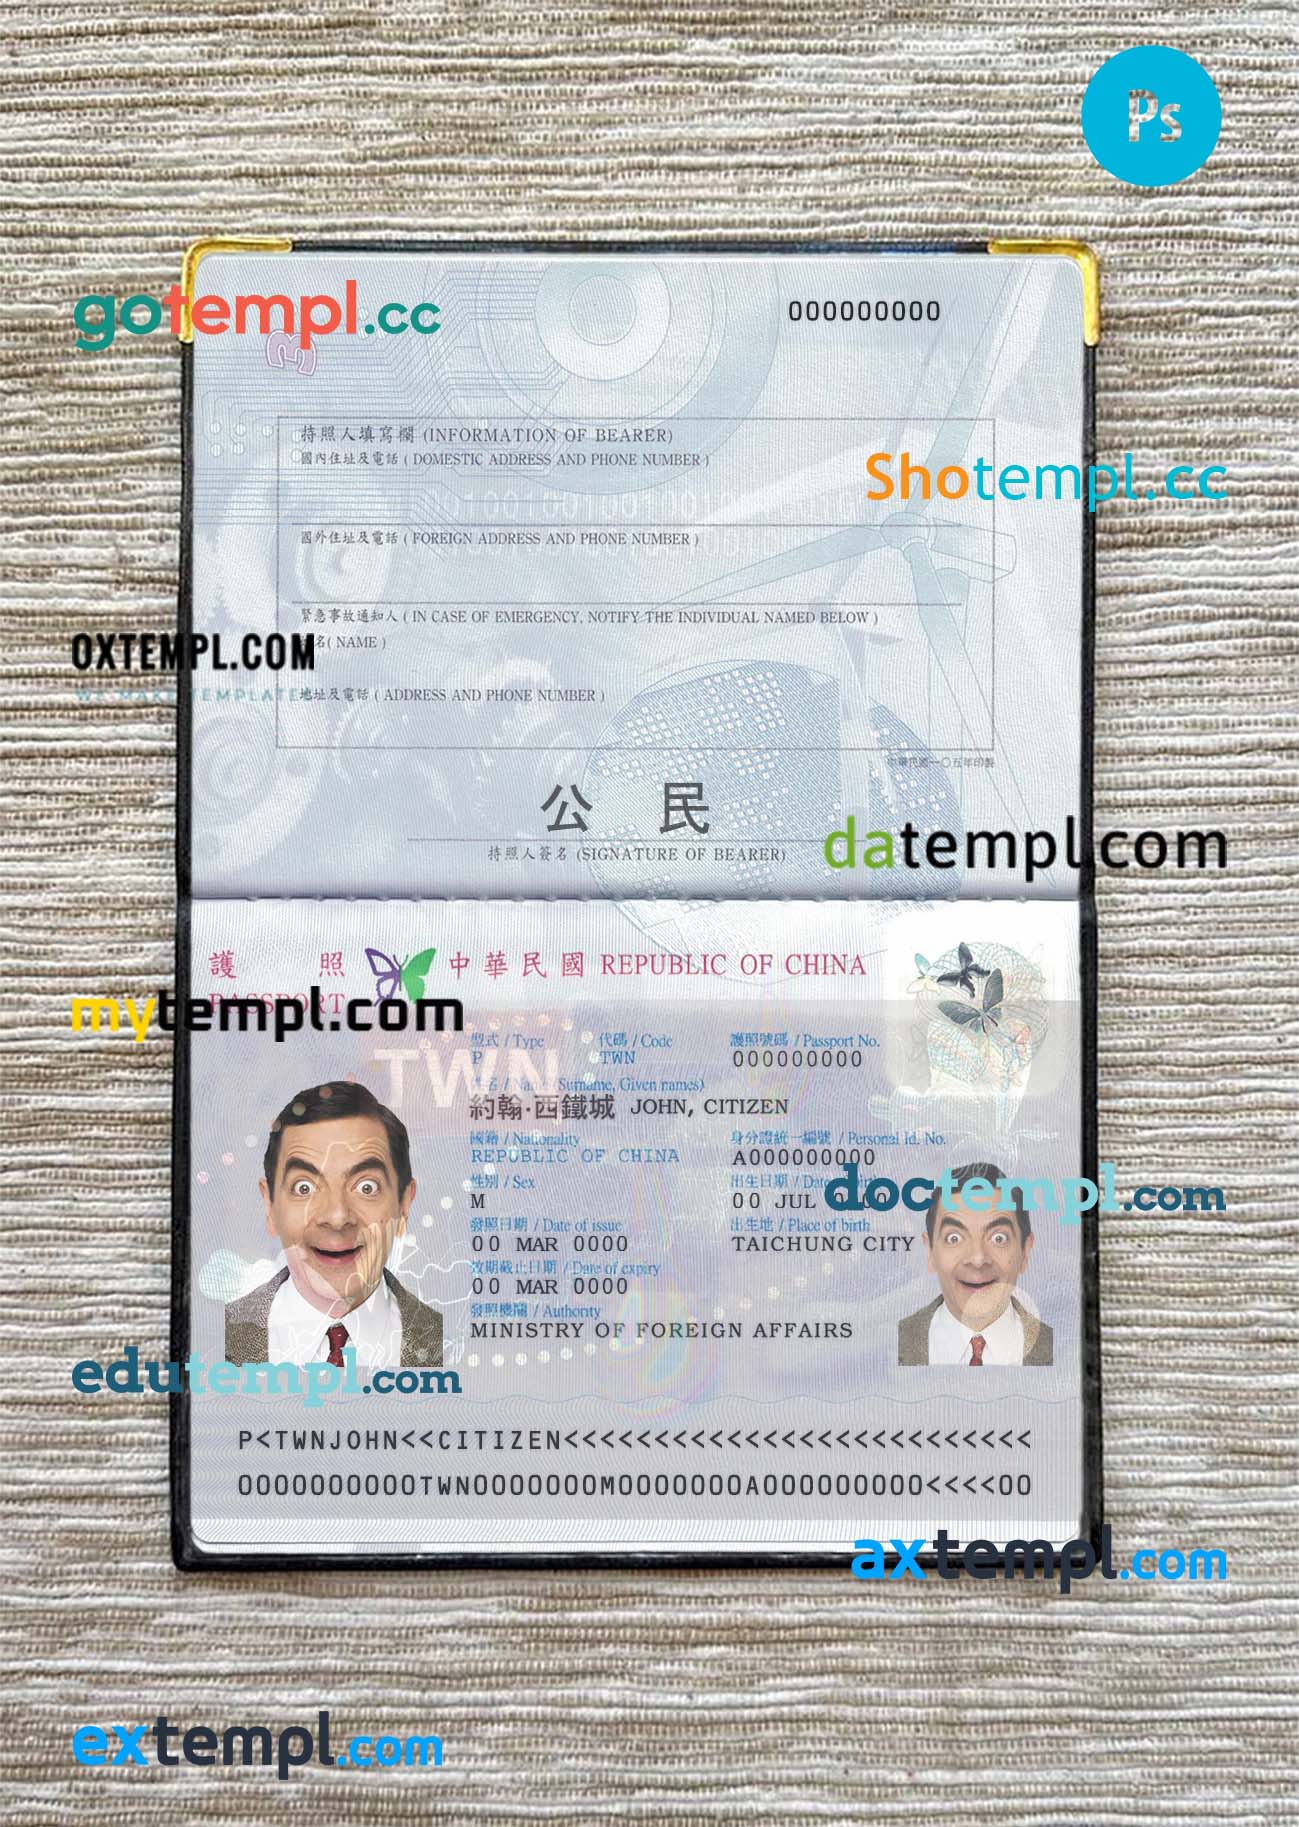 Argentina driving license PSD files, scan look and photographed image, 2 in 1